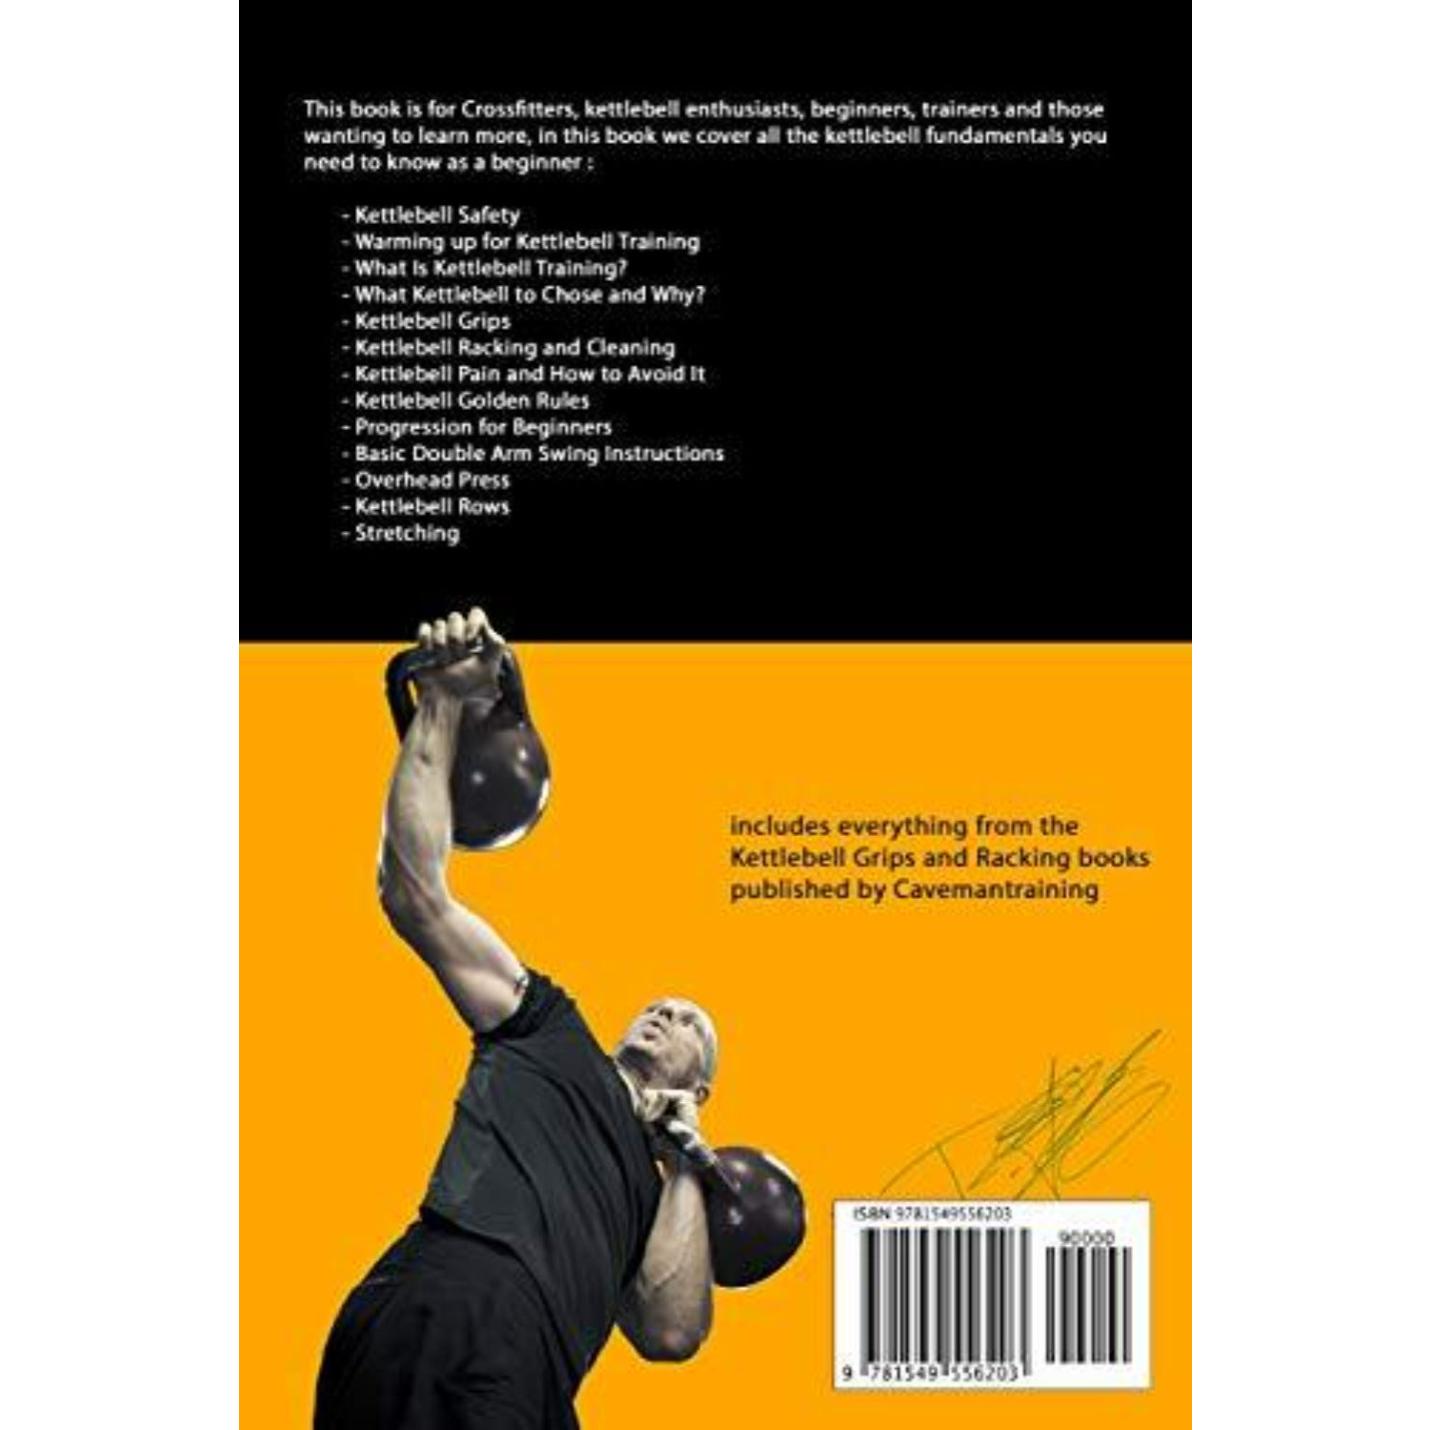 Kettlebell Training Fundamentals: Achieve Pain-Free Kettlebell Training and Build a Strong Foundation to Become a Professional Kettlebell Trainer or ... Kettlebell Trainer or Enthusiast - kettlebell oefeningen - happygetfit.com